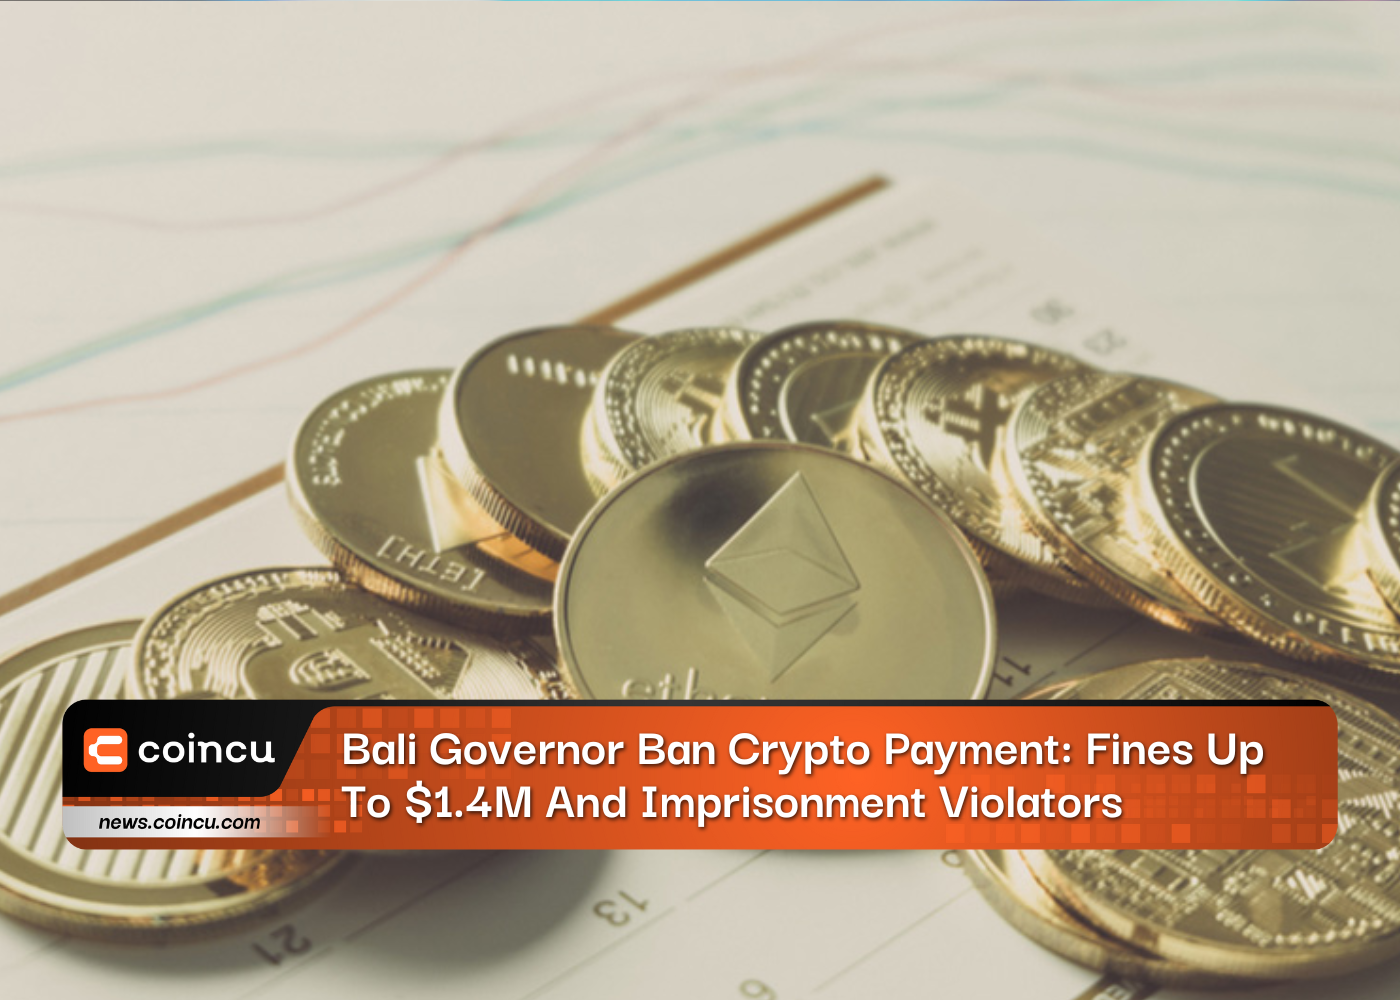 Bali Governor Ban Crypto Payment: Fines Up To $1.4M And Imprisonment Violators